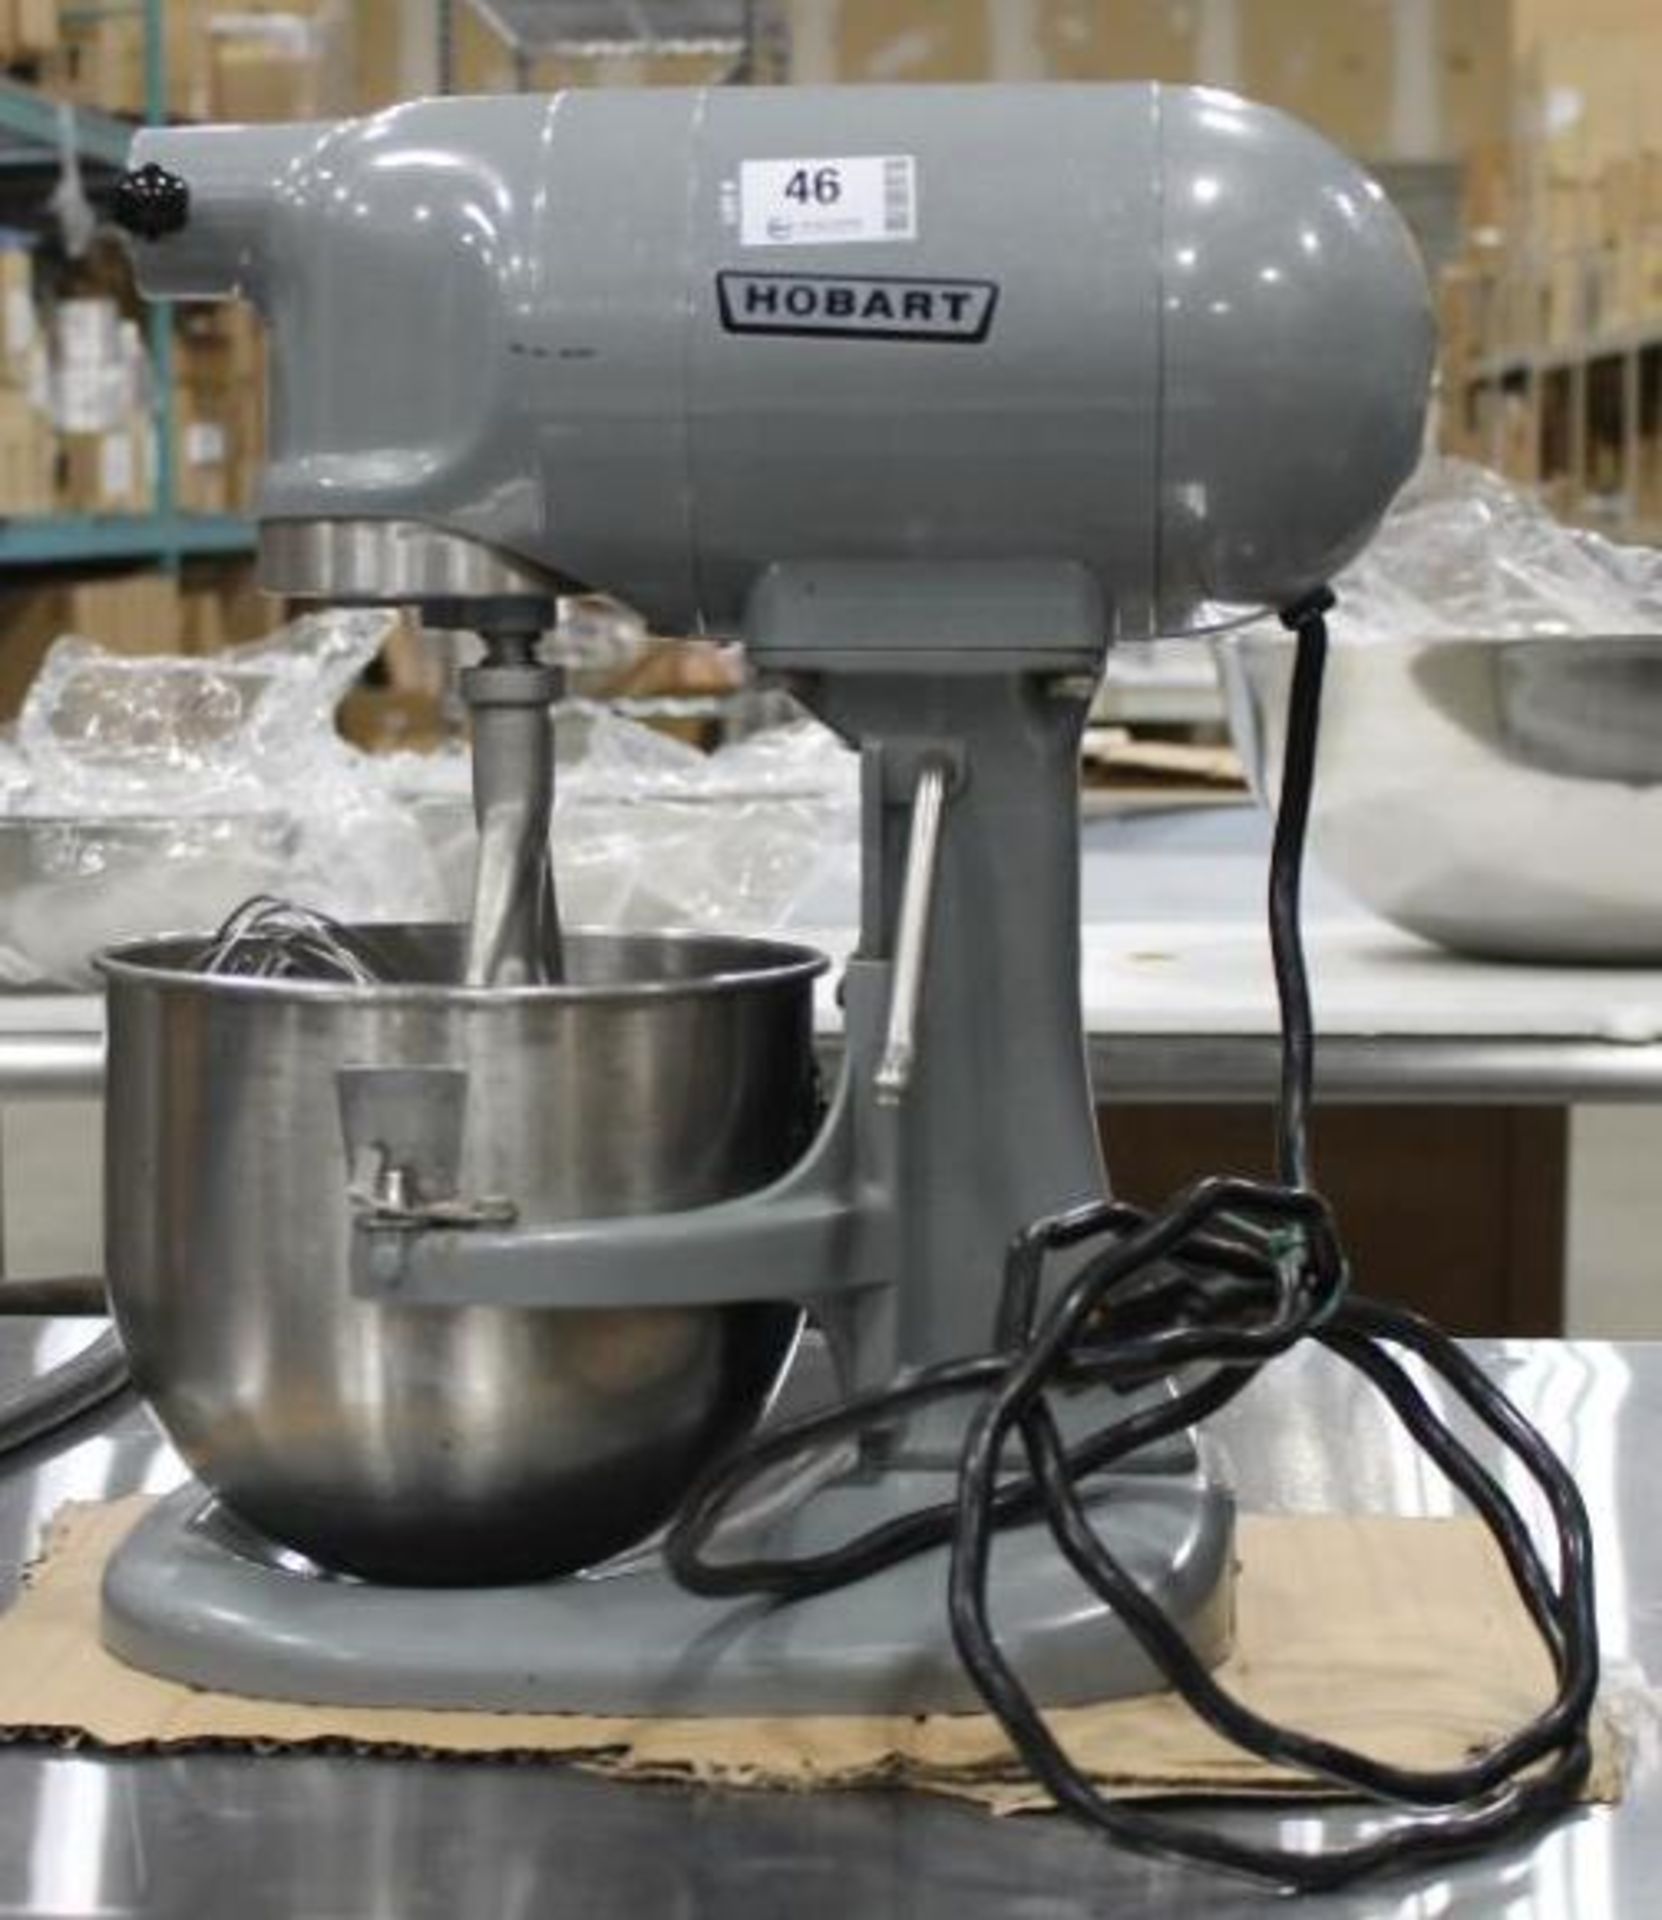 HOBART N50 5QT MIXER WITH HOOK, WHIP, PADDLE